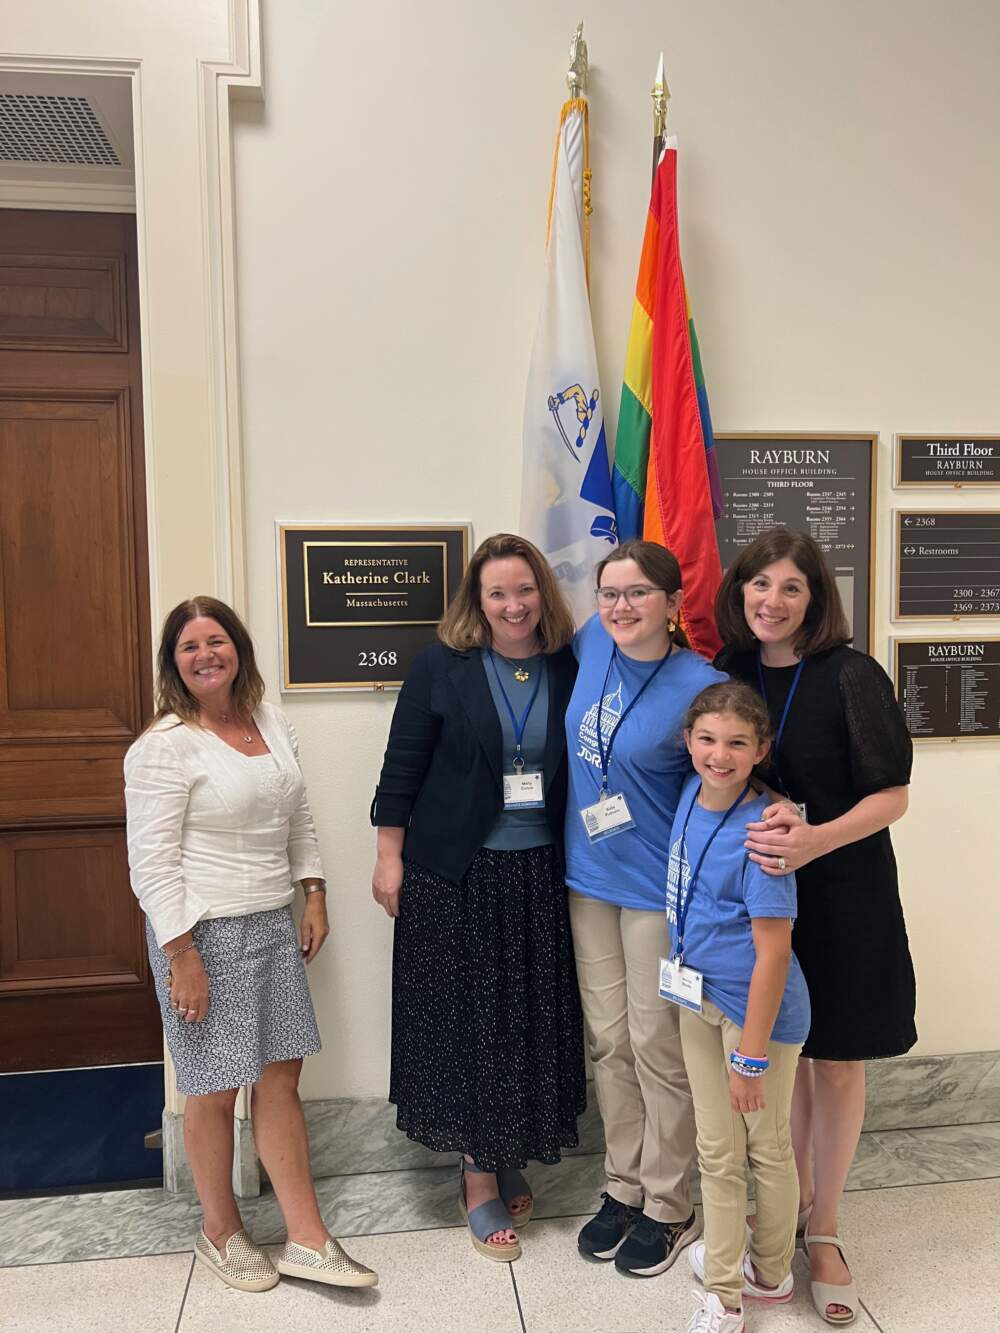 The author, center, in black, with her daughter Kate and two friends during an action day at the U.S. Capitol advocating for more support for juvenile diabetes. (Courtesy Molly Colvin)